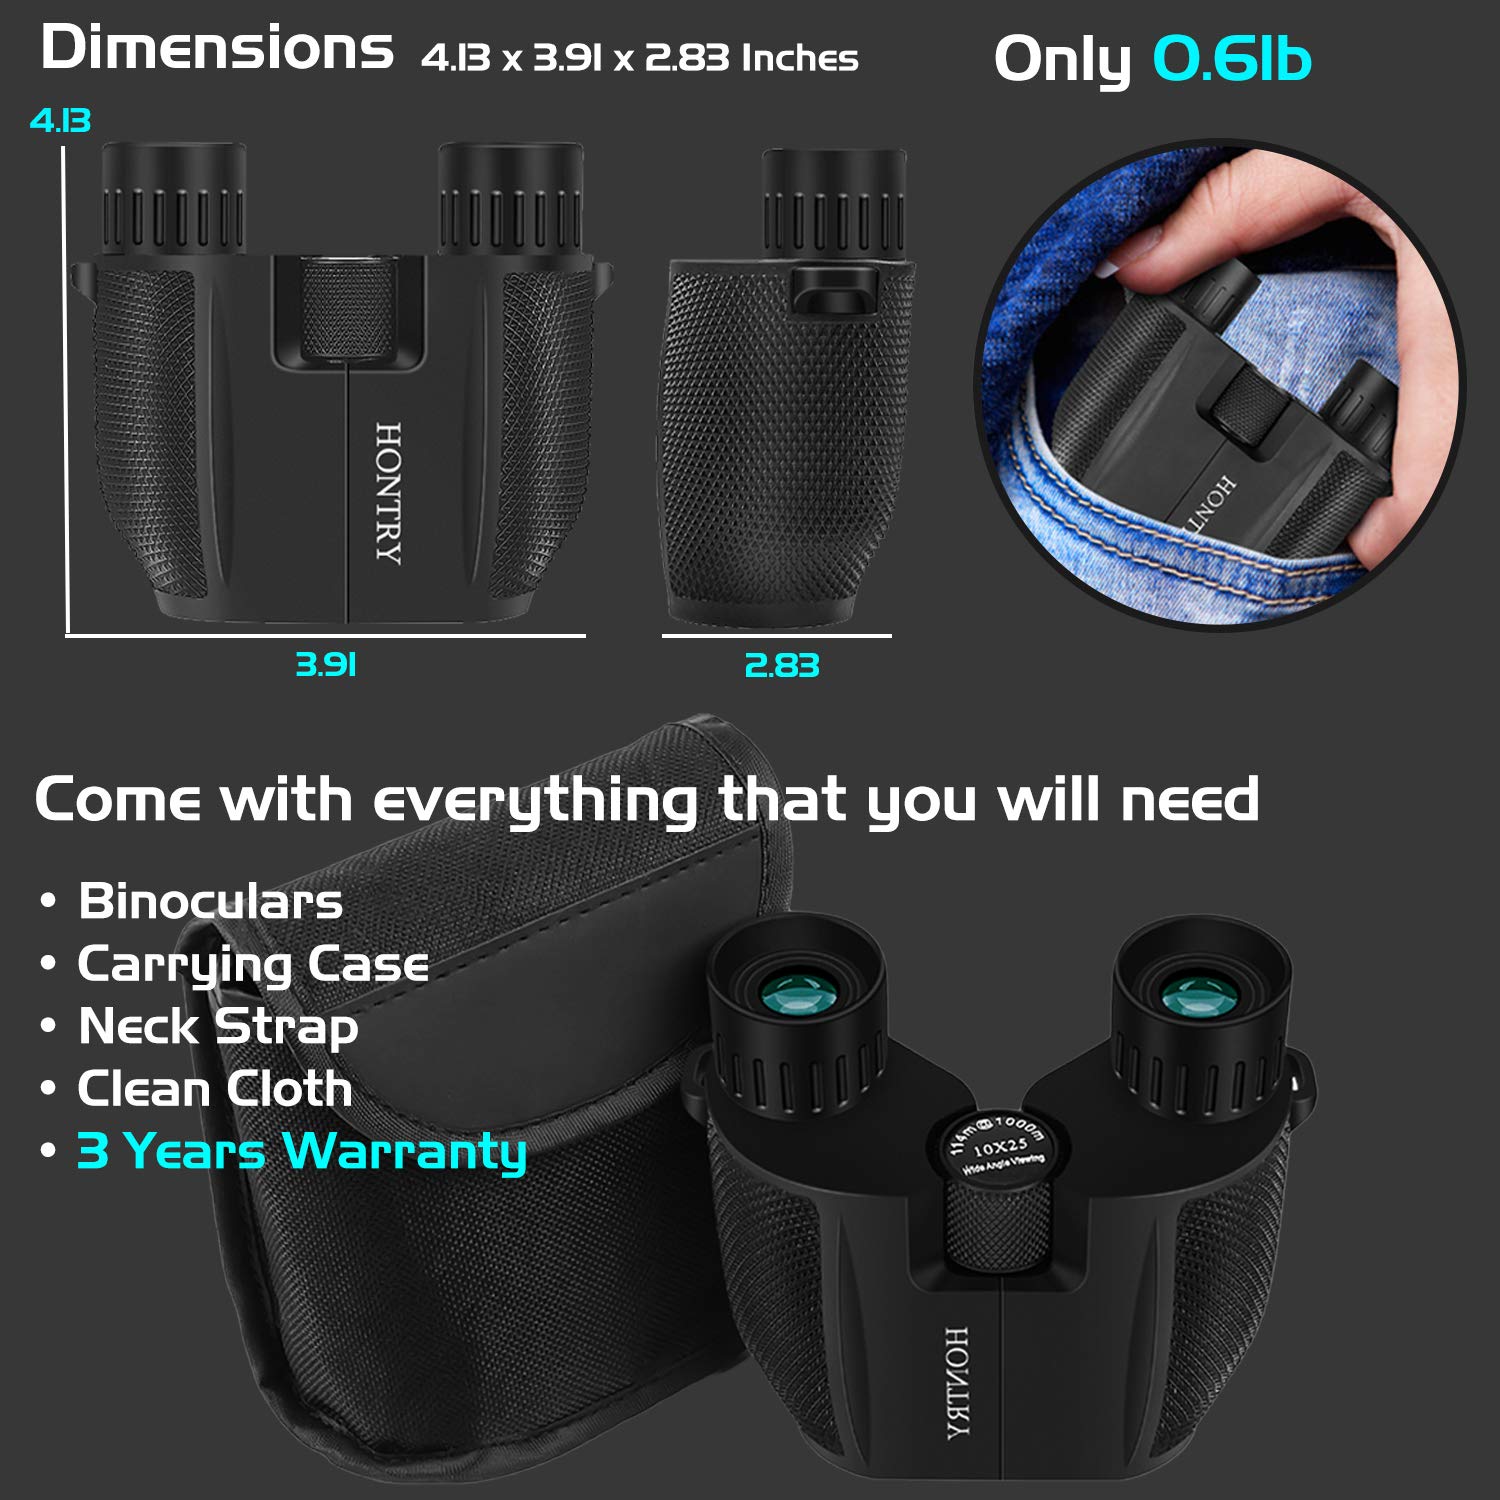 Hontry Binoculars for Adults and Kids, 10x25 Compact Binoculars for Bird Watching, Theater and Concerts, Hunting and Sport Games